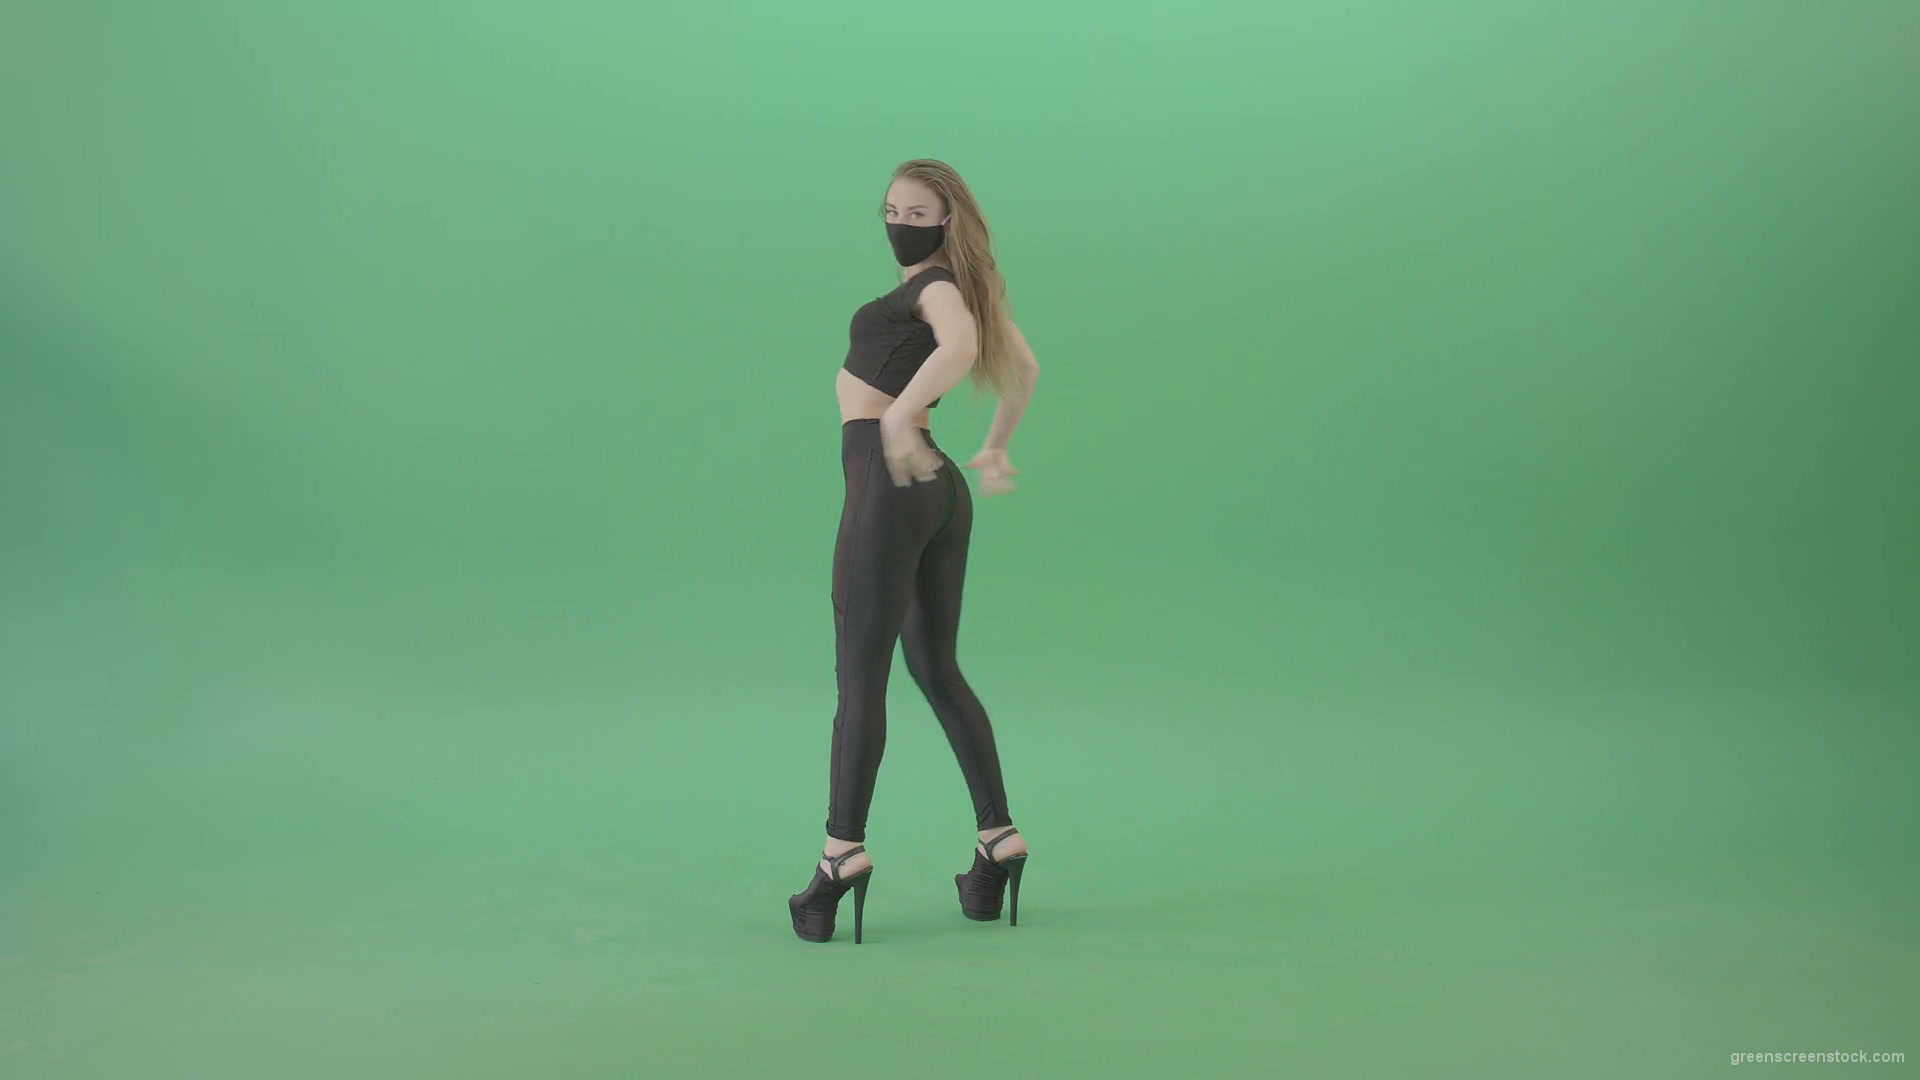 Exotic-sexy-dance-by-girl-in-black-latex-dress-isolated-on-green-screen-4K-Video-Footage-1920_008 Green Screen Stock